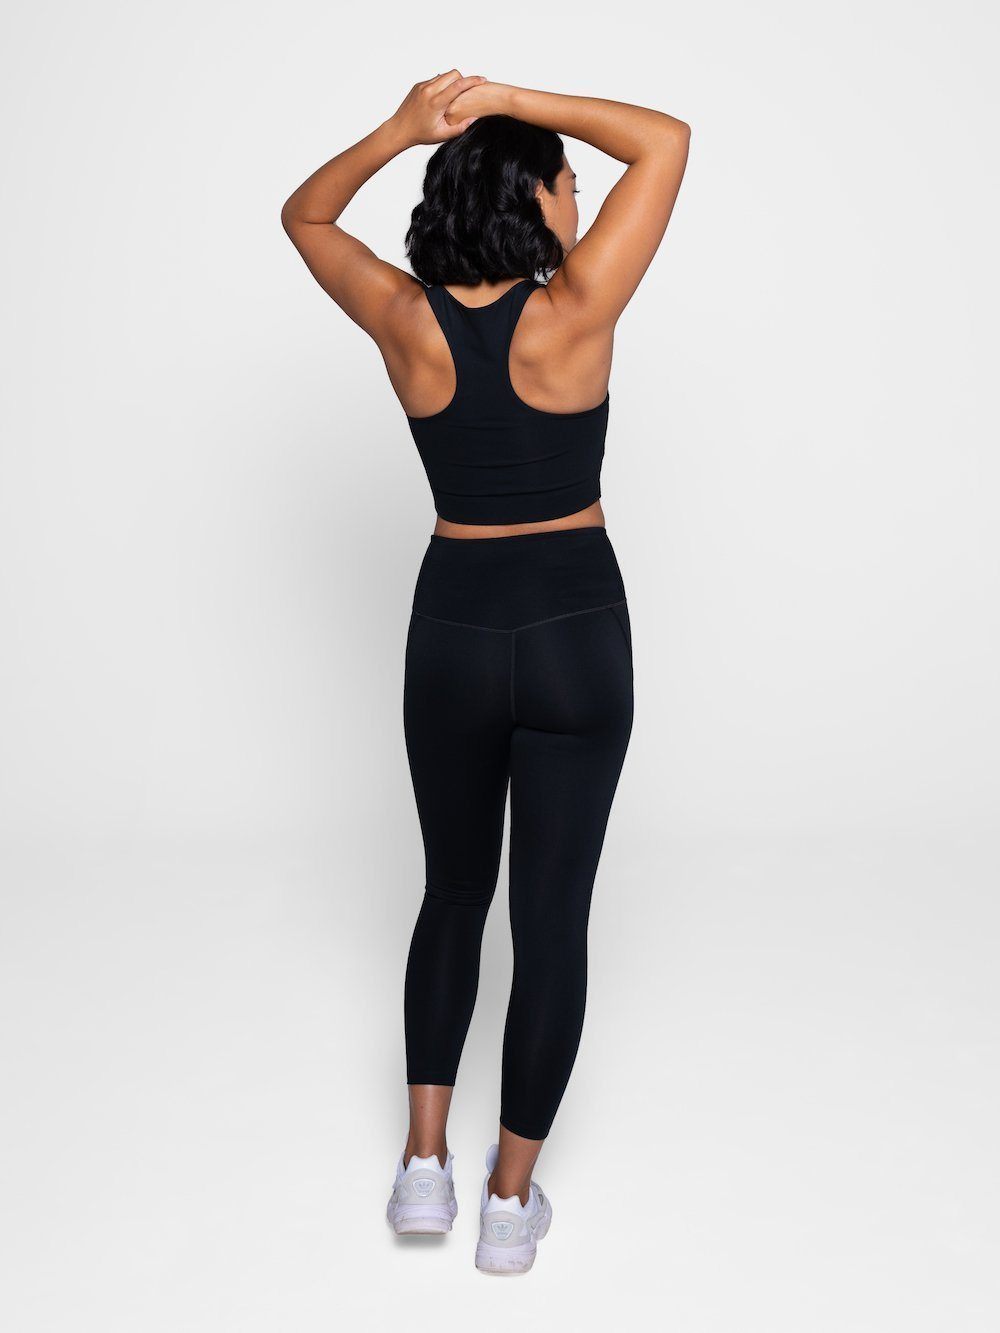 Girlfriend Collective W's Compressive Legging - 7/8 - Made From Recycled Plastic Bottles Black Pants